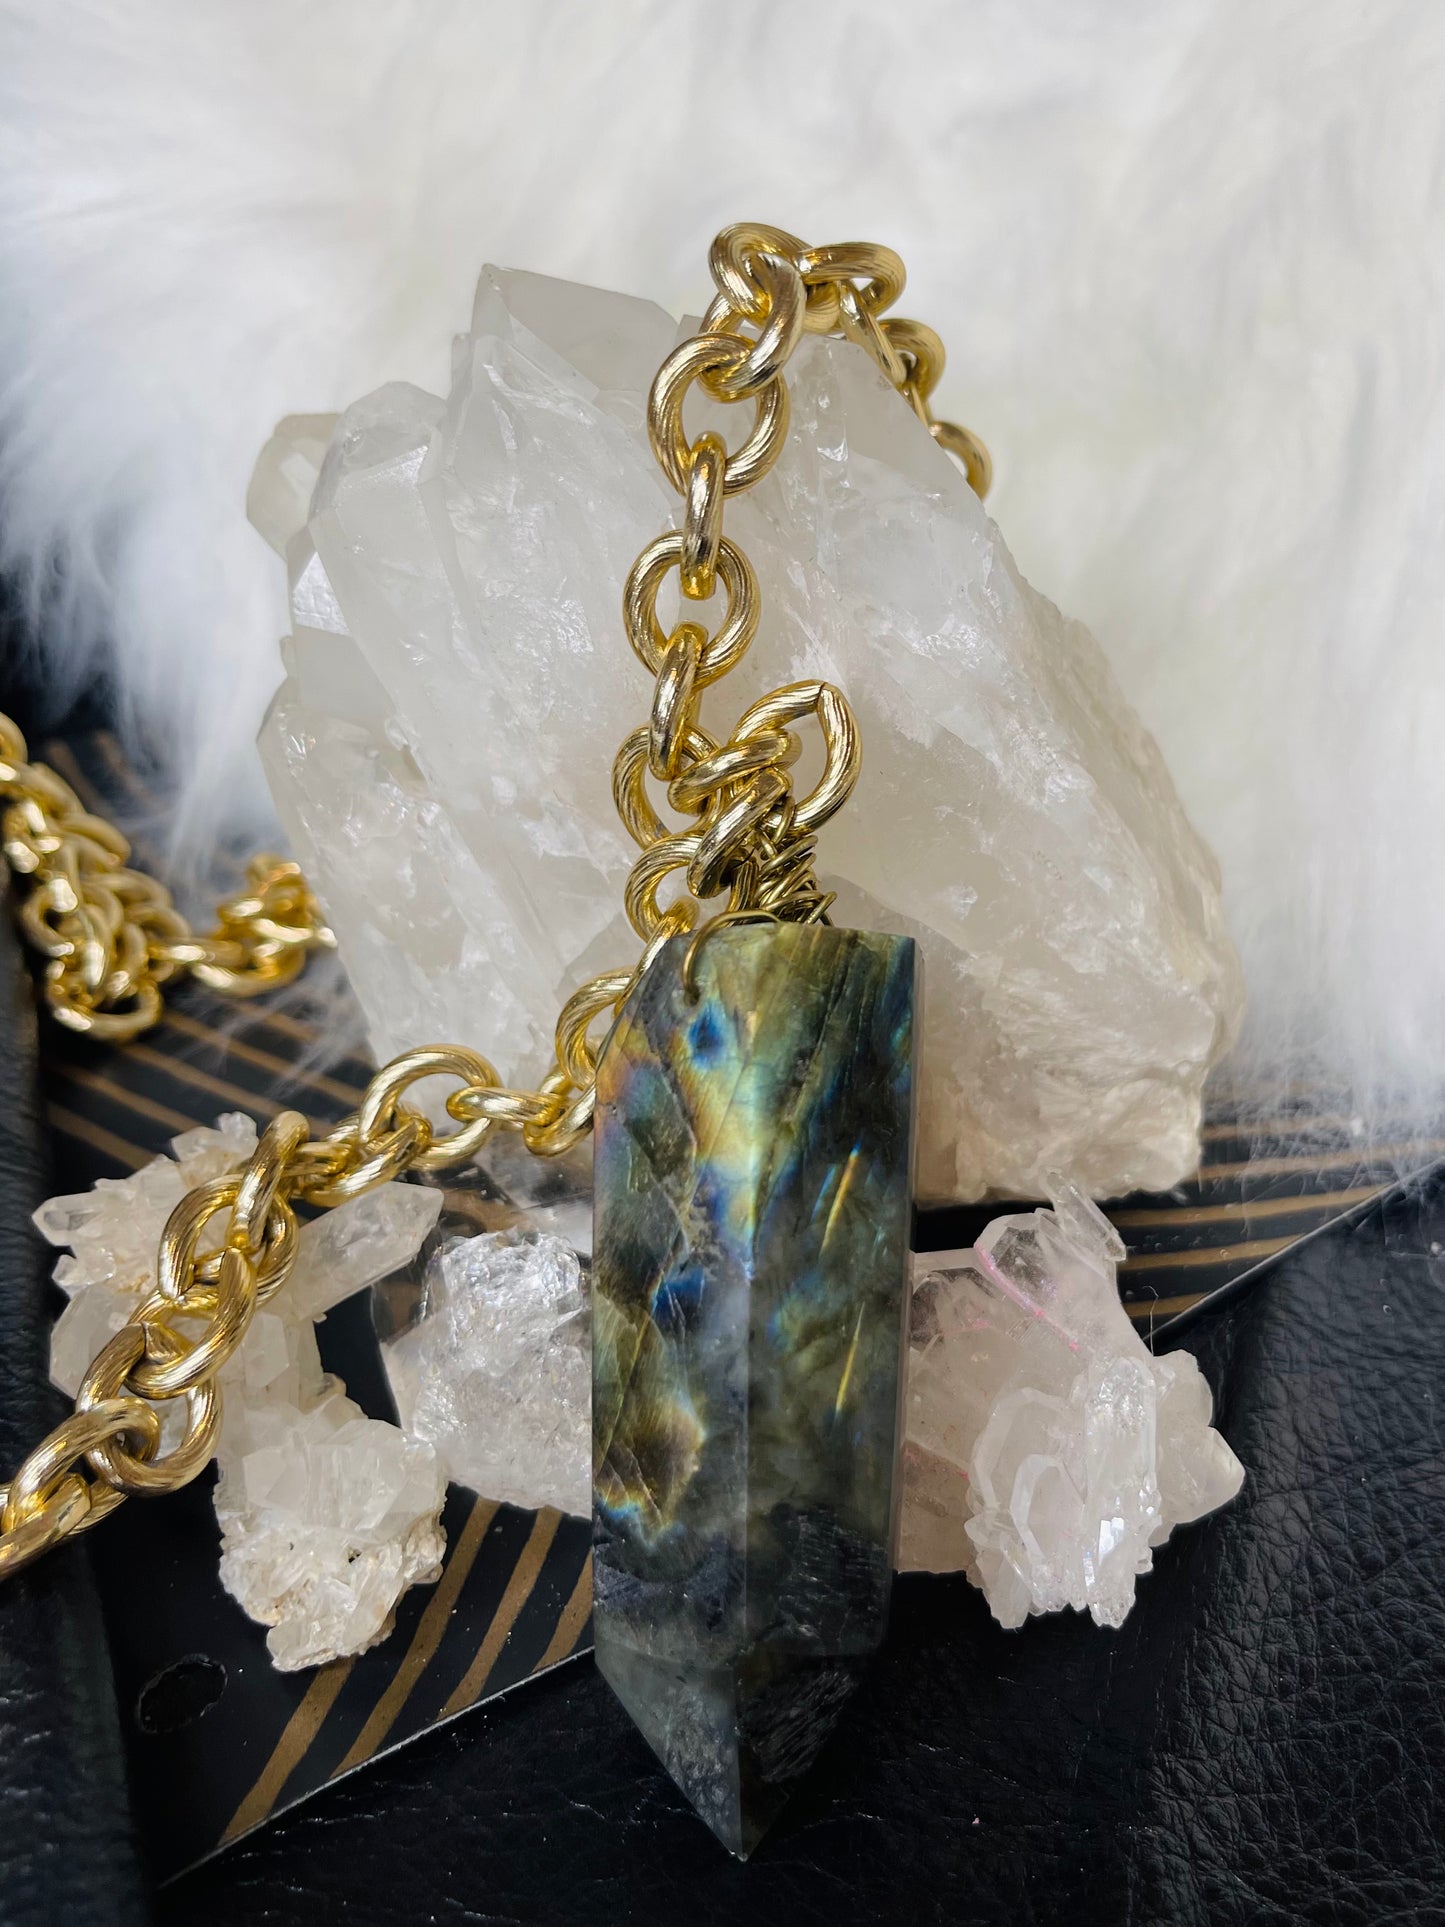 Massive Labradorite Crystal Soul Chain Necklace - Vintage Gold Chain- Akashic Records Collection